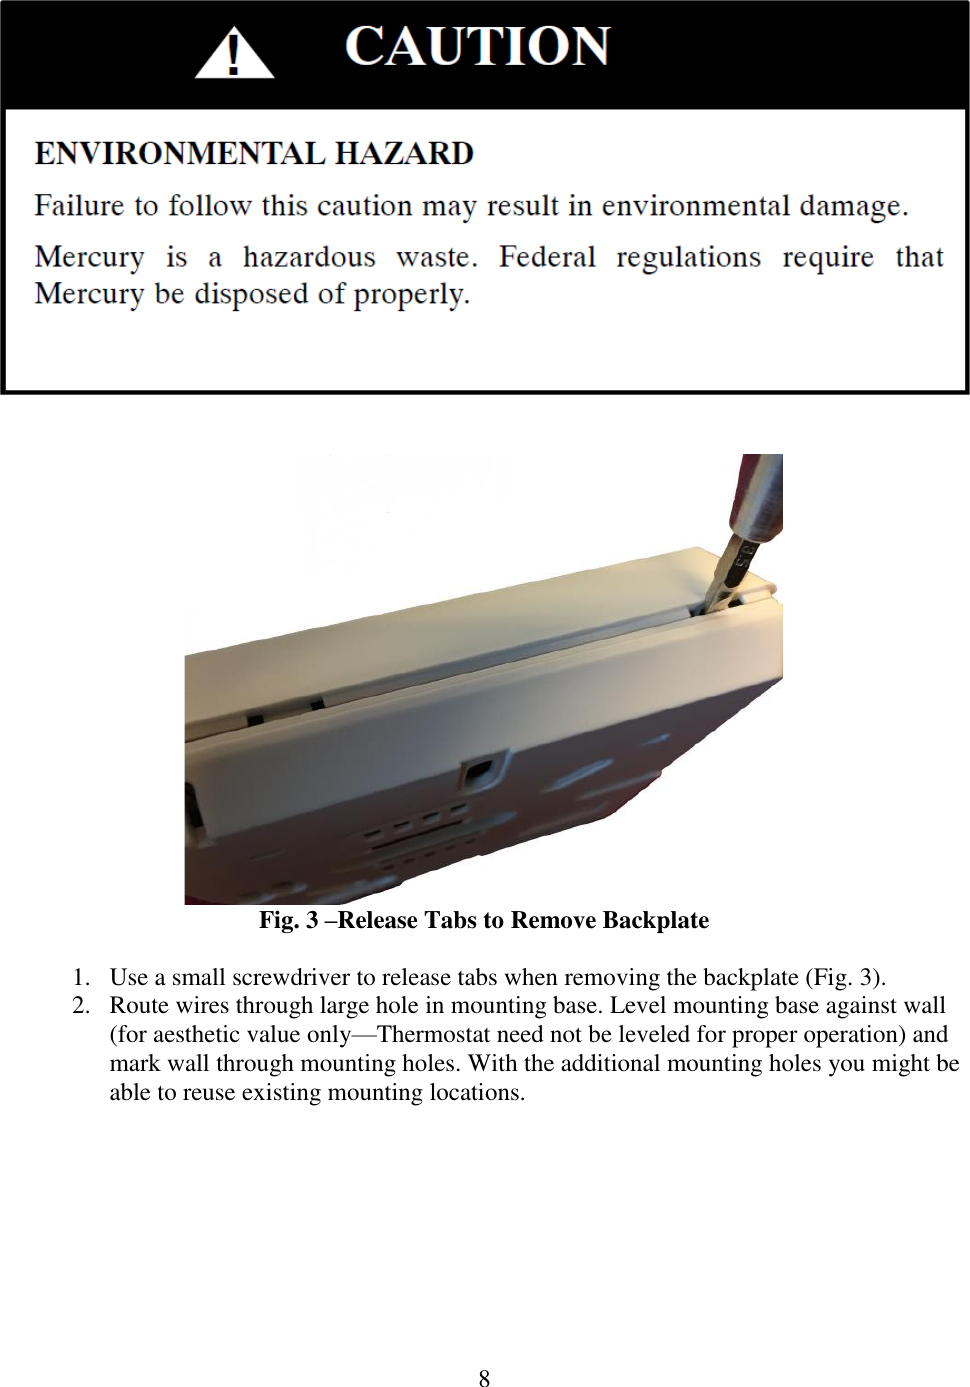 8      Fig. 3 –Release Tabs to Remove Backplate  1. Use a small screwdriver to release tabs when removing the backplate (Fig. 3).  2. Route wires through large hole in mounting base. Level mounting base against wall (for aesthetic value only—Thermostat need not be leveled for proper operation) and mark wall through mounting holes. With the additional mounting holes you might be able to reuse existing mounting locations.  